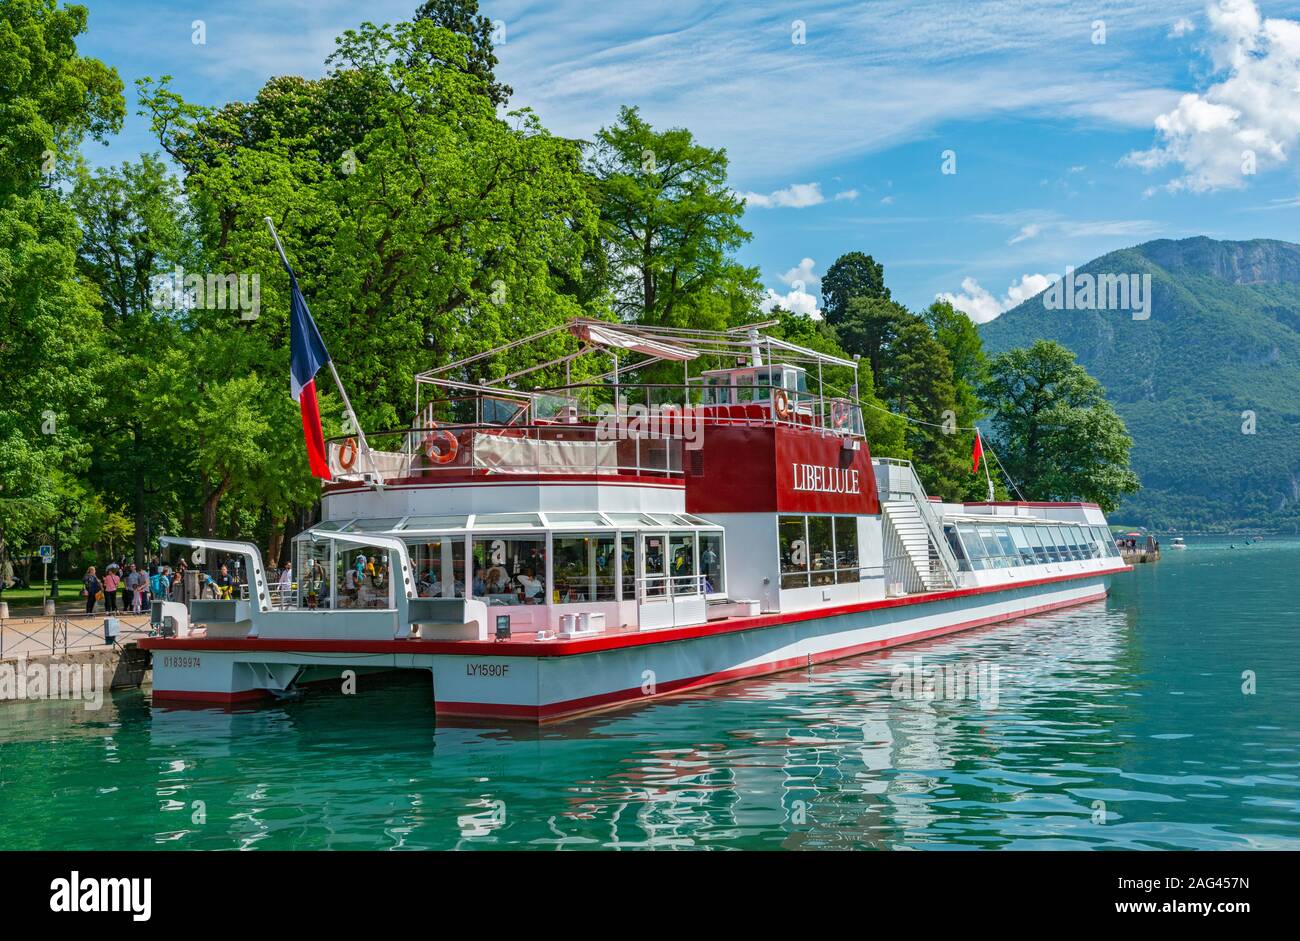 France, Haute-Savoie, Annecy, MS Libellule offers lunch and dinner cruises on Lac d'Annecy Stock Photo